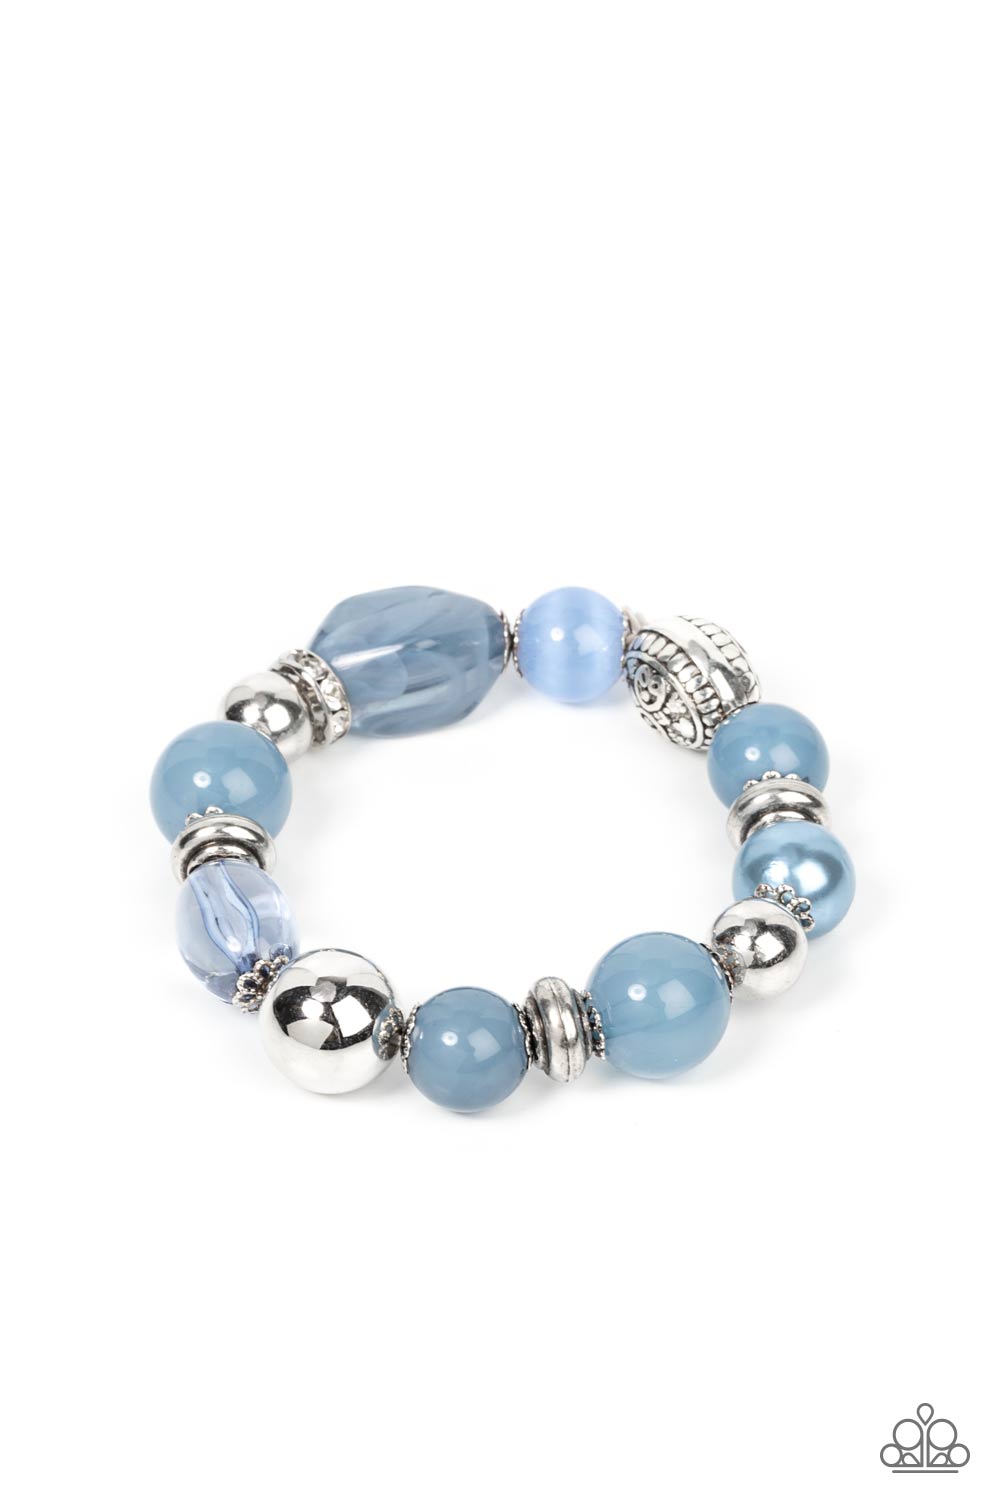 Tonal Takeover - Blue Pearly - Opaque Bead and Silver Stretchy Bracelet - Paparazzi Accessories - An enchanting assortment of silver beads and white rhinestone encrusted silver rings join an opaque, glassy, and pearly assortment of Spring Lake beads along a stretchy band around the wrist for a colorful fashion bracelet.